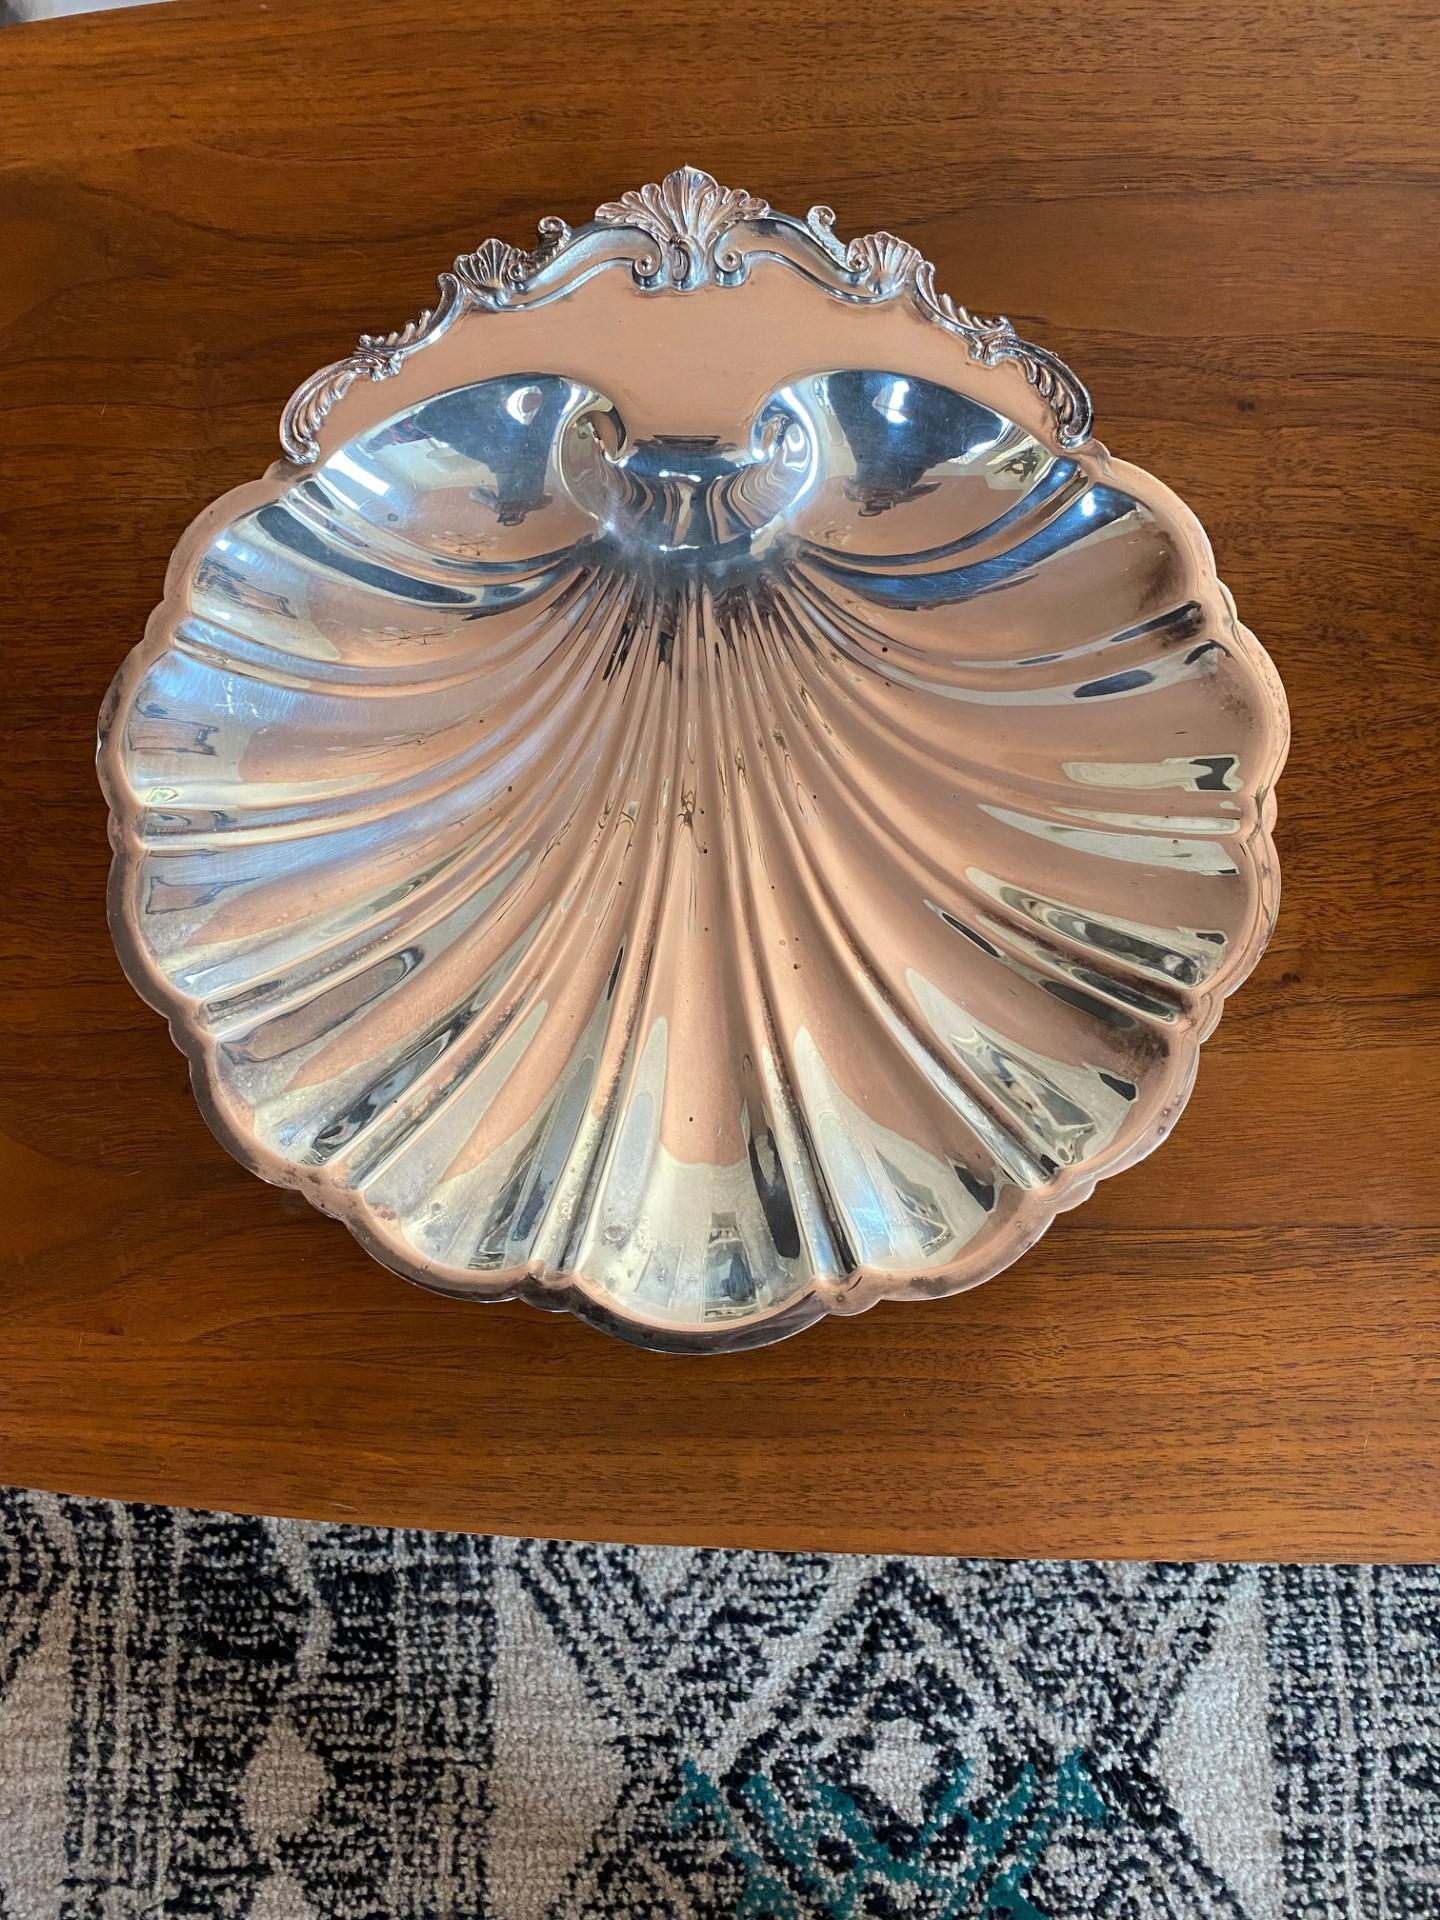 Vintage and luminous footed dish that exudes glamour.  This beautiful vintage piece is silver plated and the patinated.  The dish is sculptural as it stands on 3 footed shells underneath adding style and evoking an era were glamour lived in all